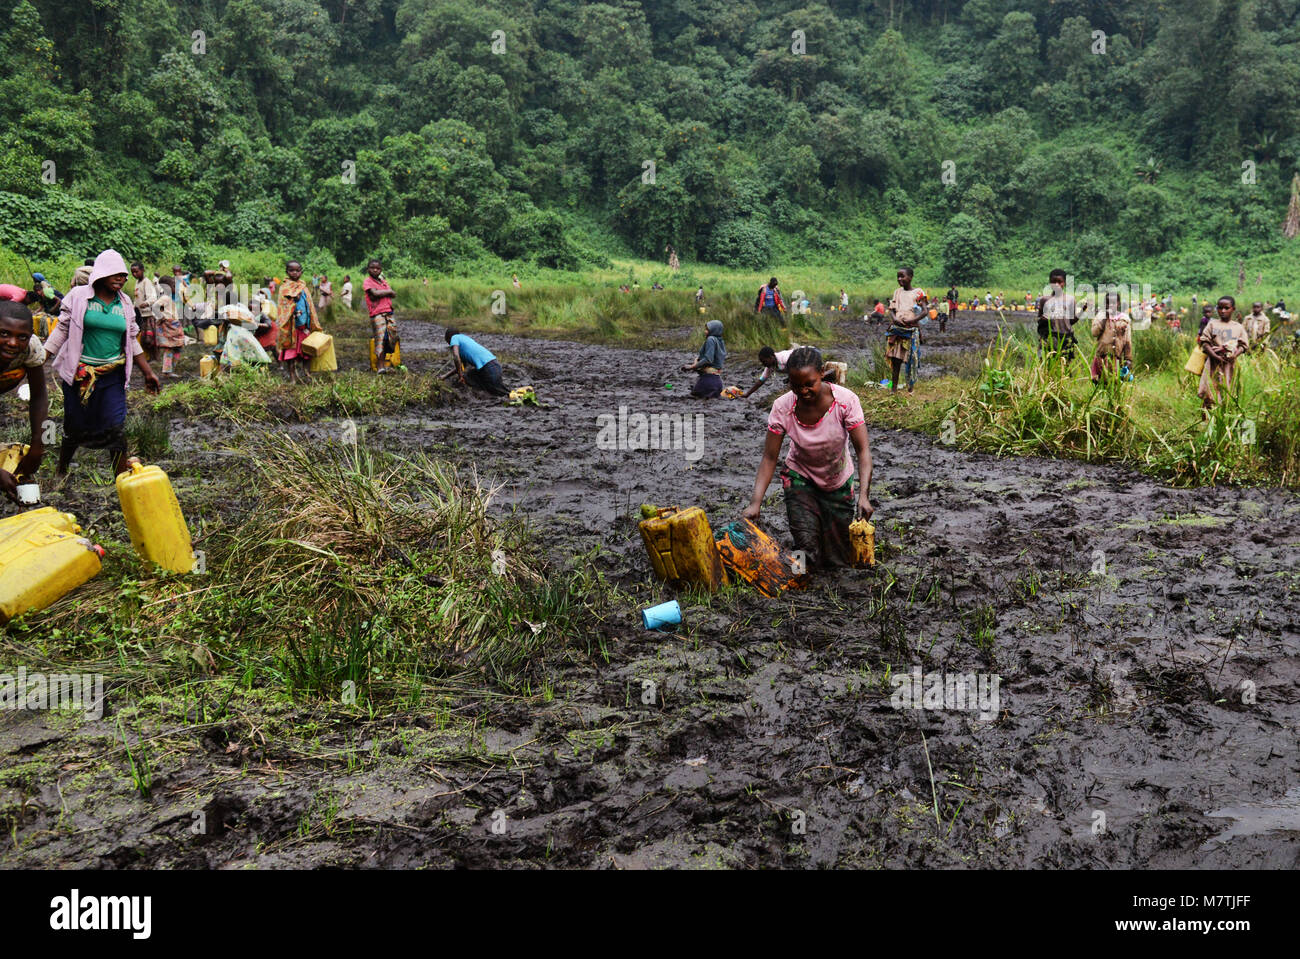 Congolese villagers fill their water supply from this Muddy pond. The only good water source they have. Stock Photo